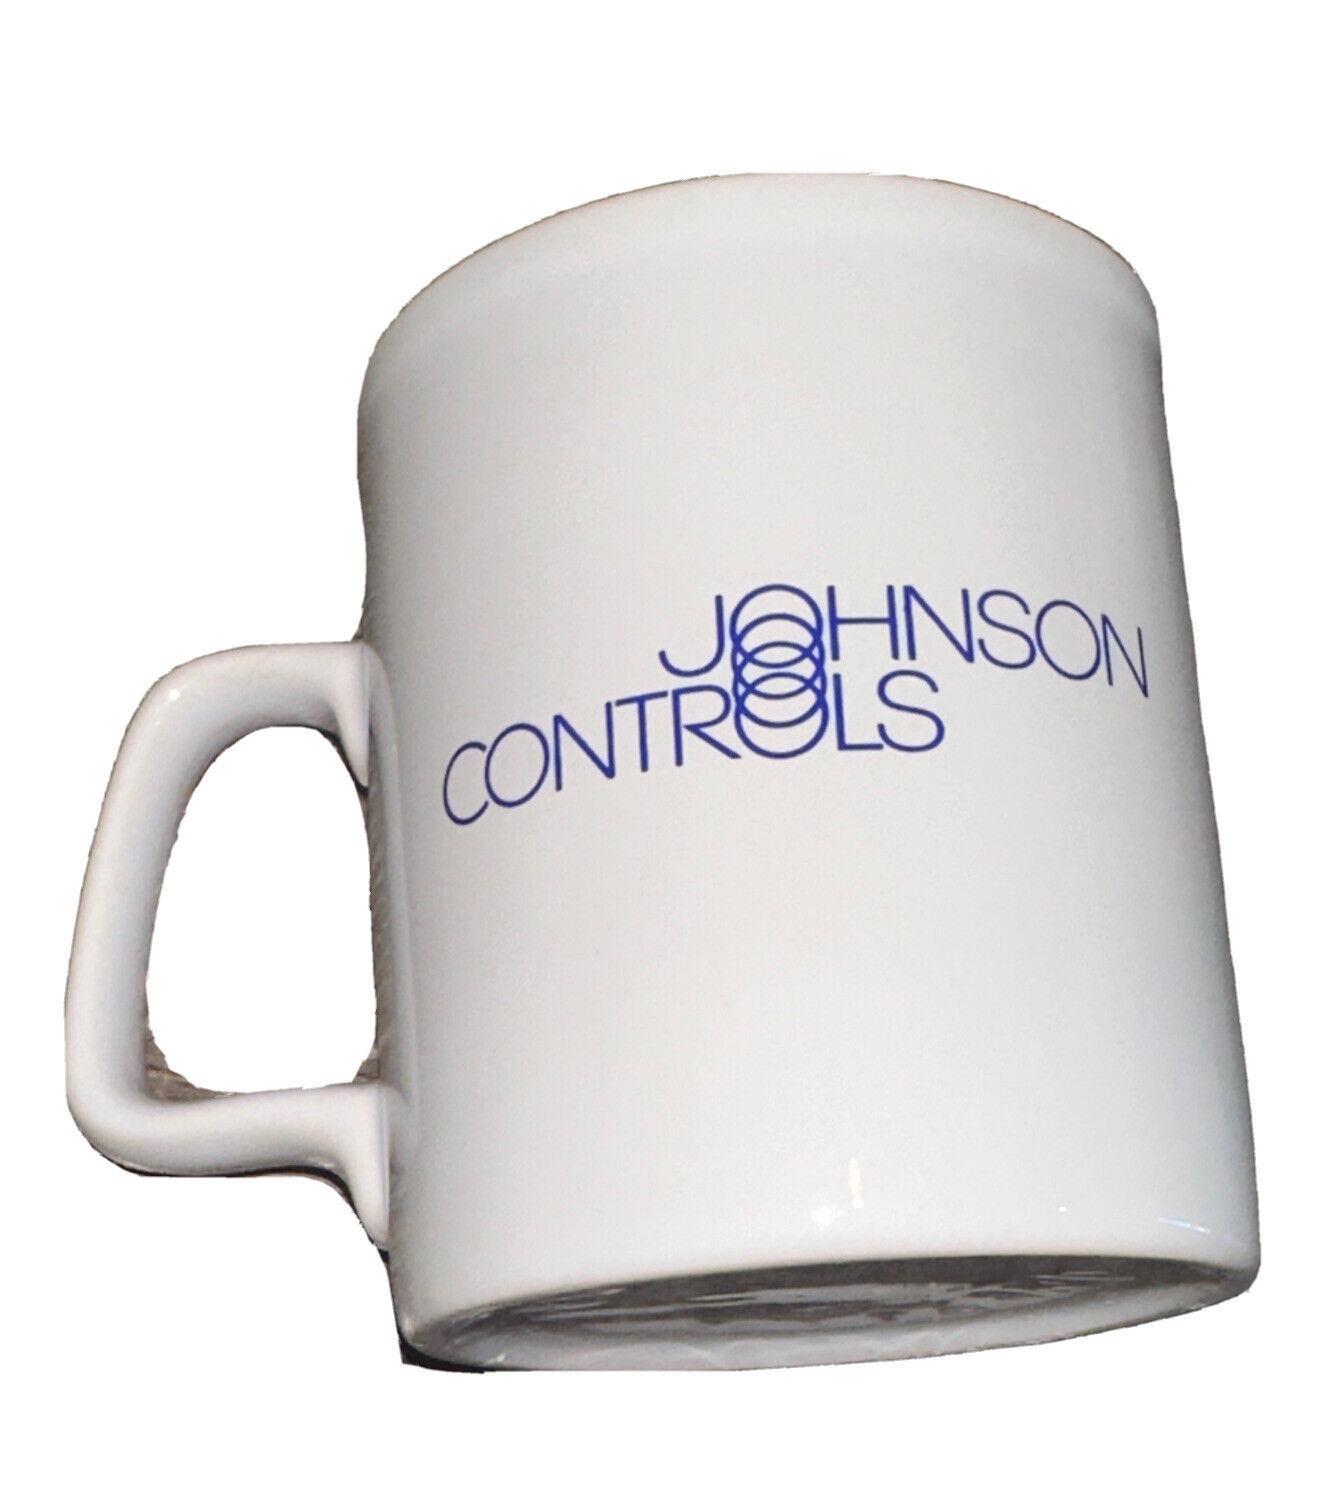 Johnson Controls Promotional Mug Made In England Vintage Great Condition